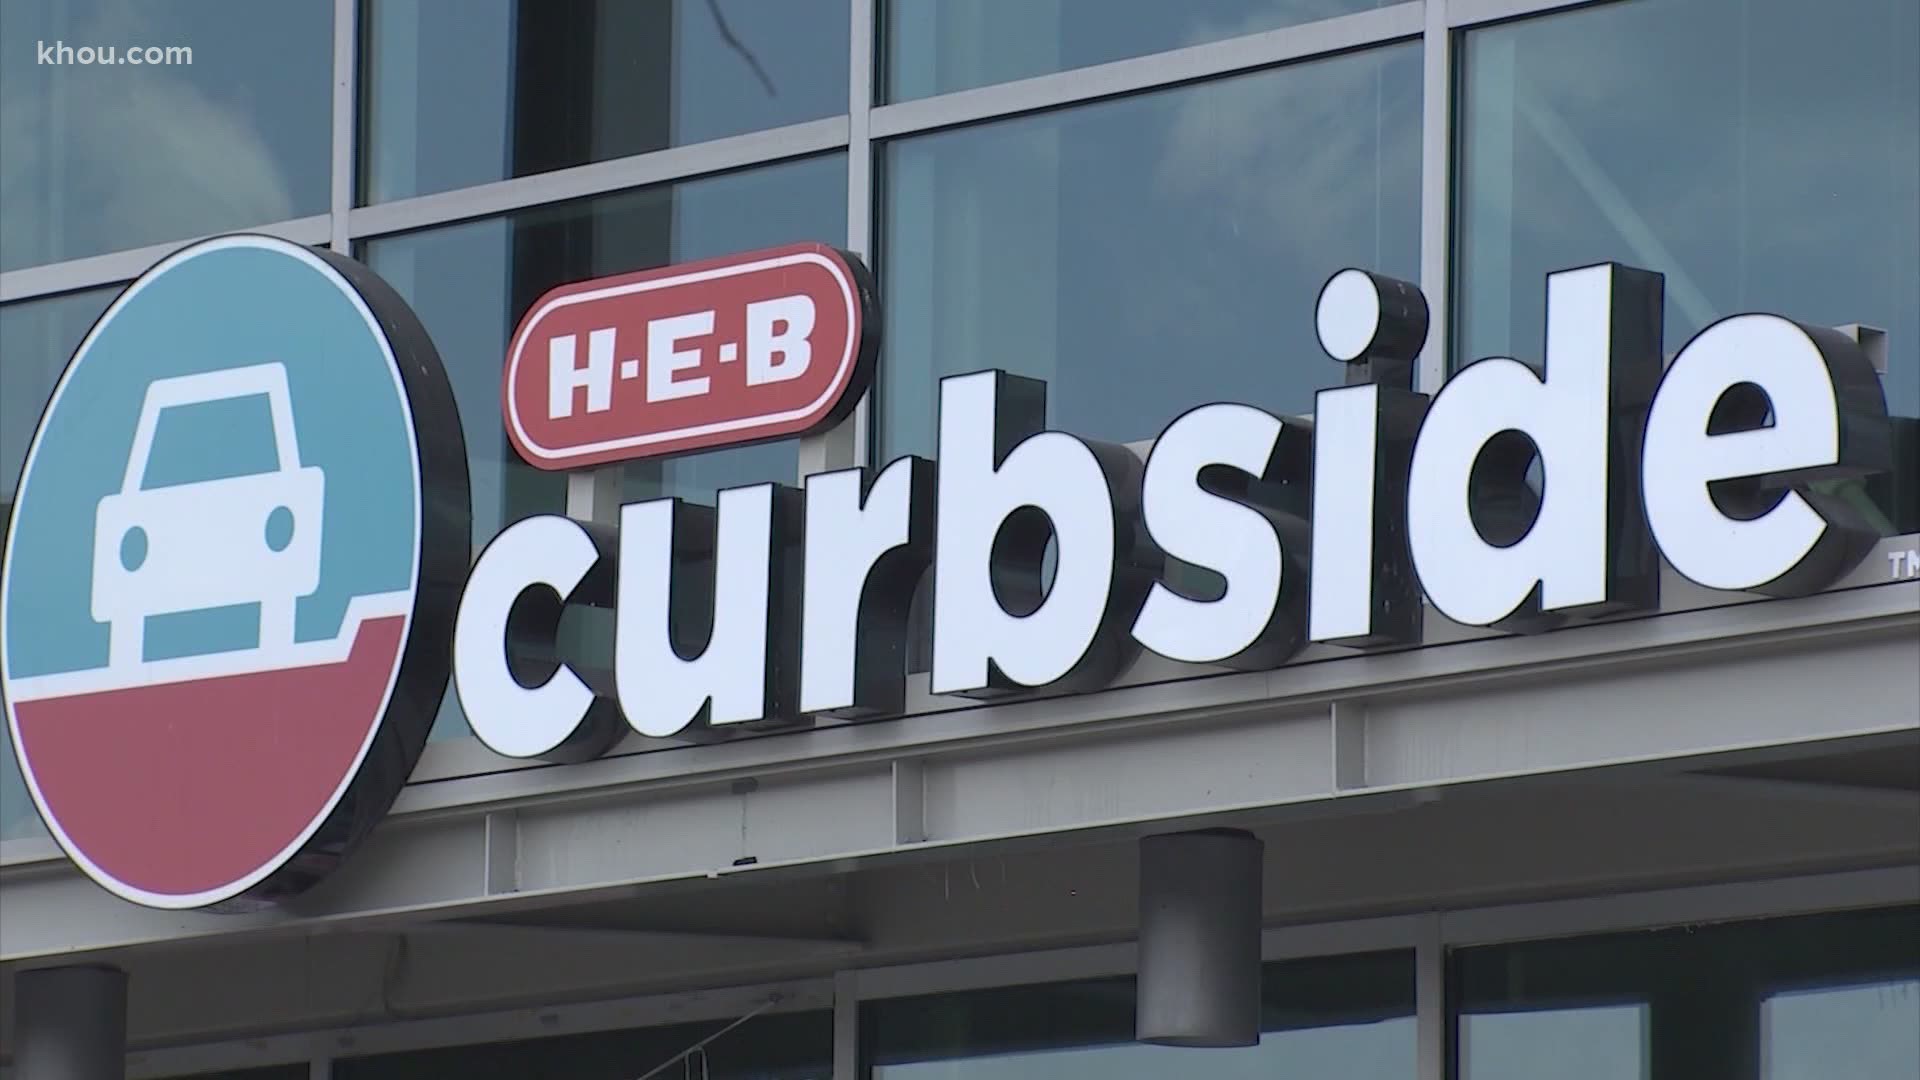 H-E-B is now accepting SNAP EBT payments for H-E-B Curbside and Home Delivery orders directly on the My H-E-B mobile app and heb.com.